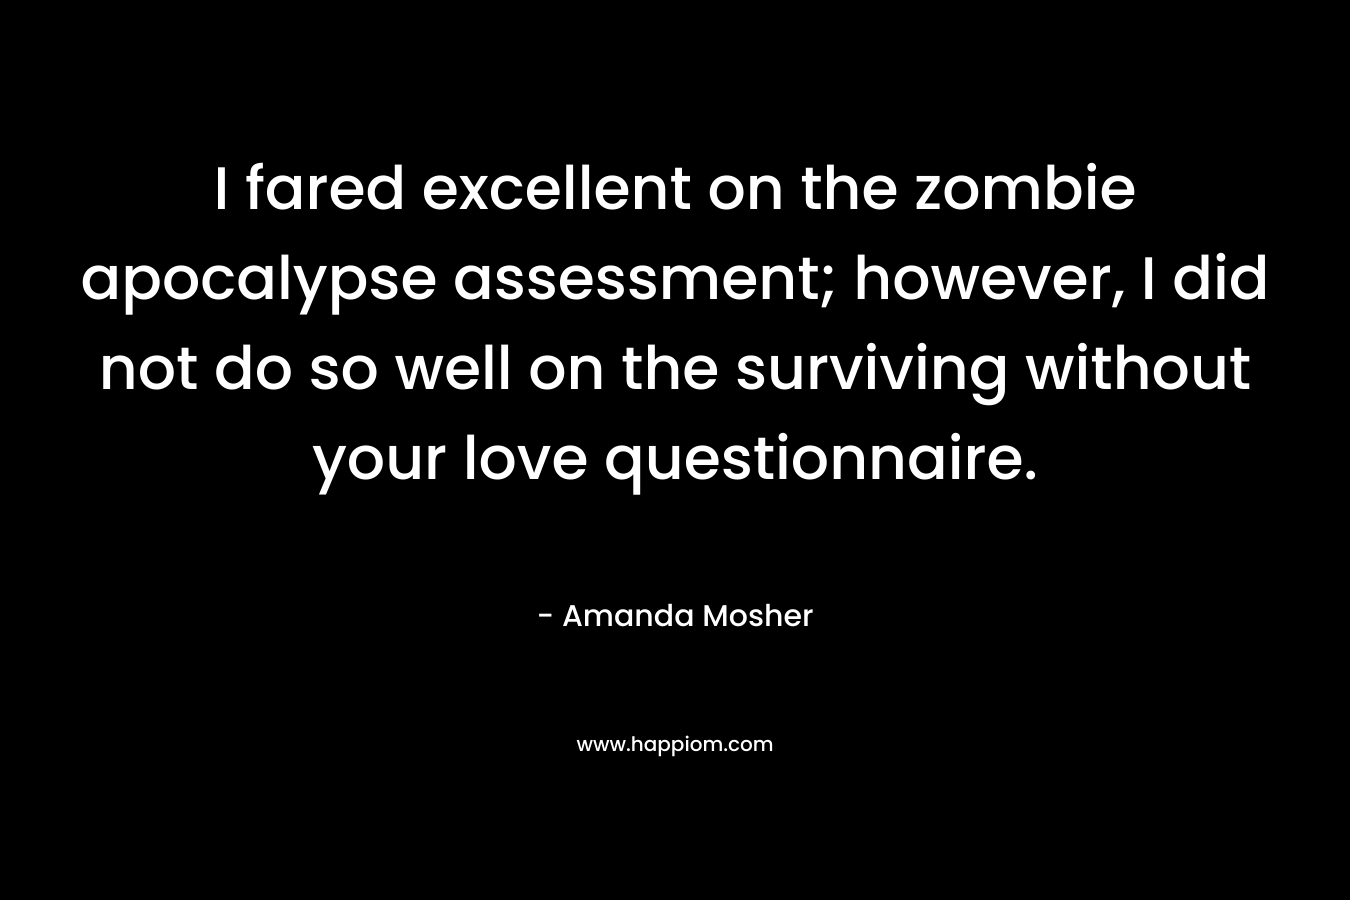 I fared excellent on the zombie apocalypse assessment; however, I did not do so well on the surviving without your love questionnaire. – Amanda Mosher